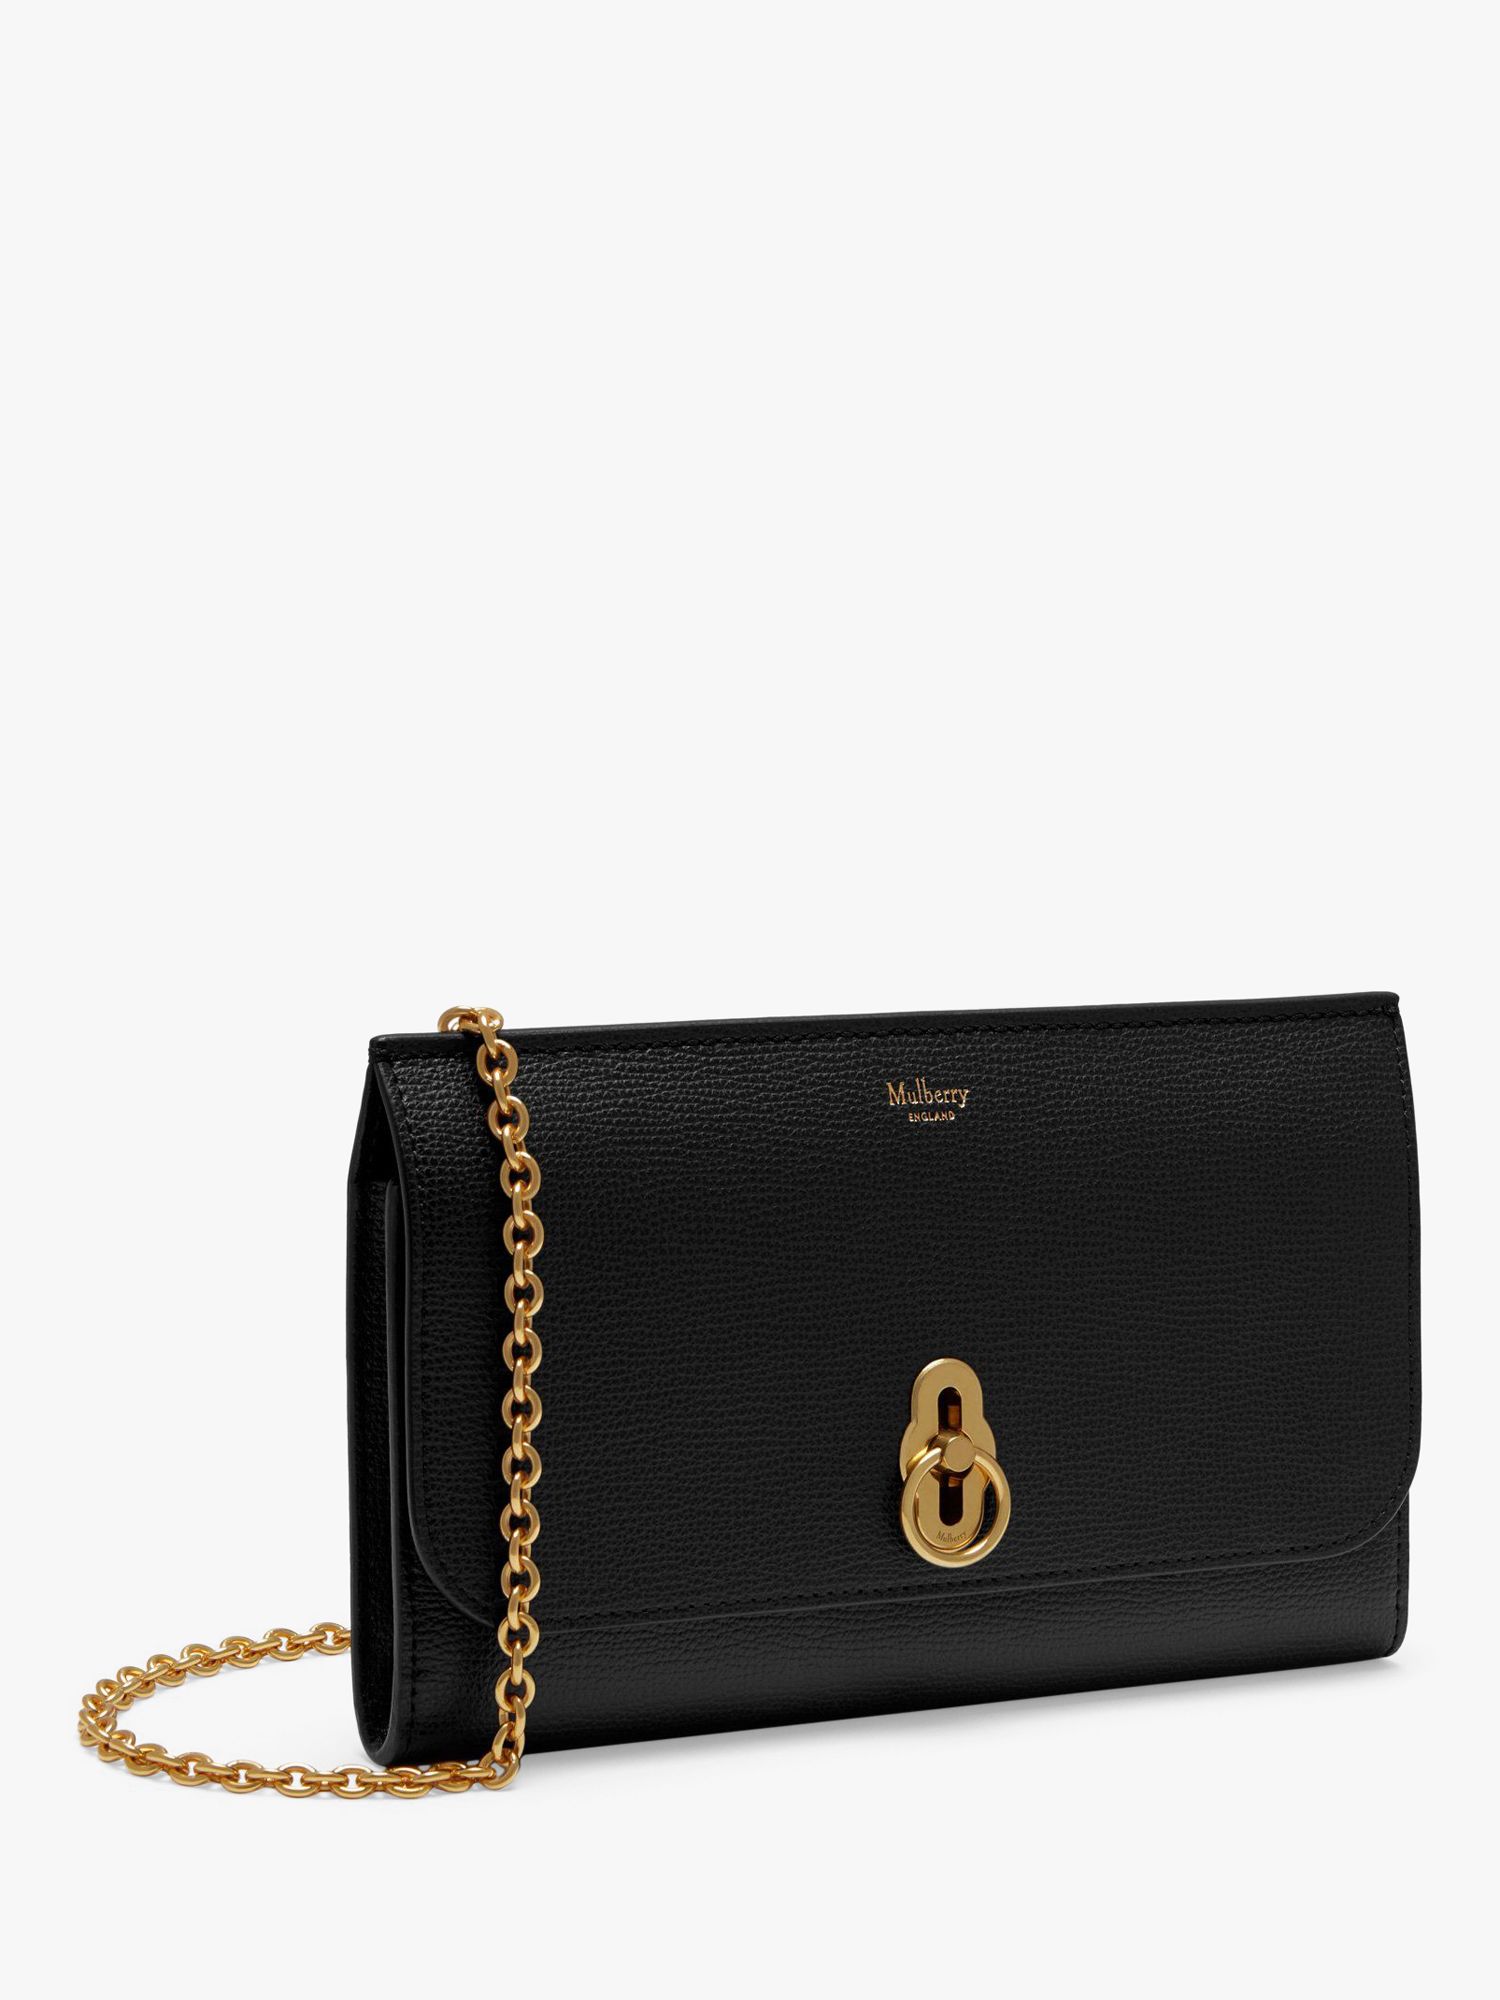 Buy Mulberry Amberley Small Classic Grain Leather Clutch Bag Online at johnlewis.com